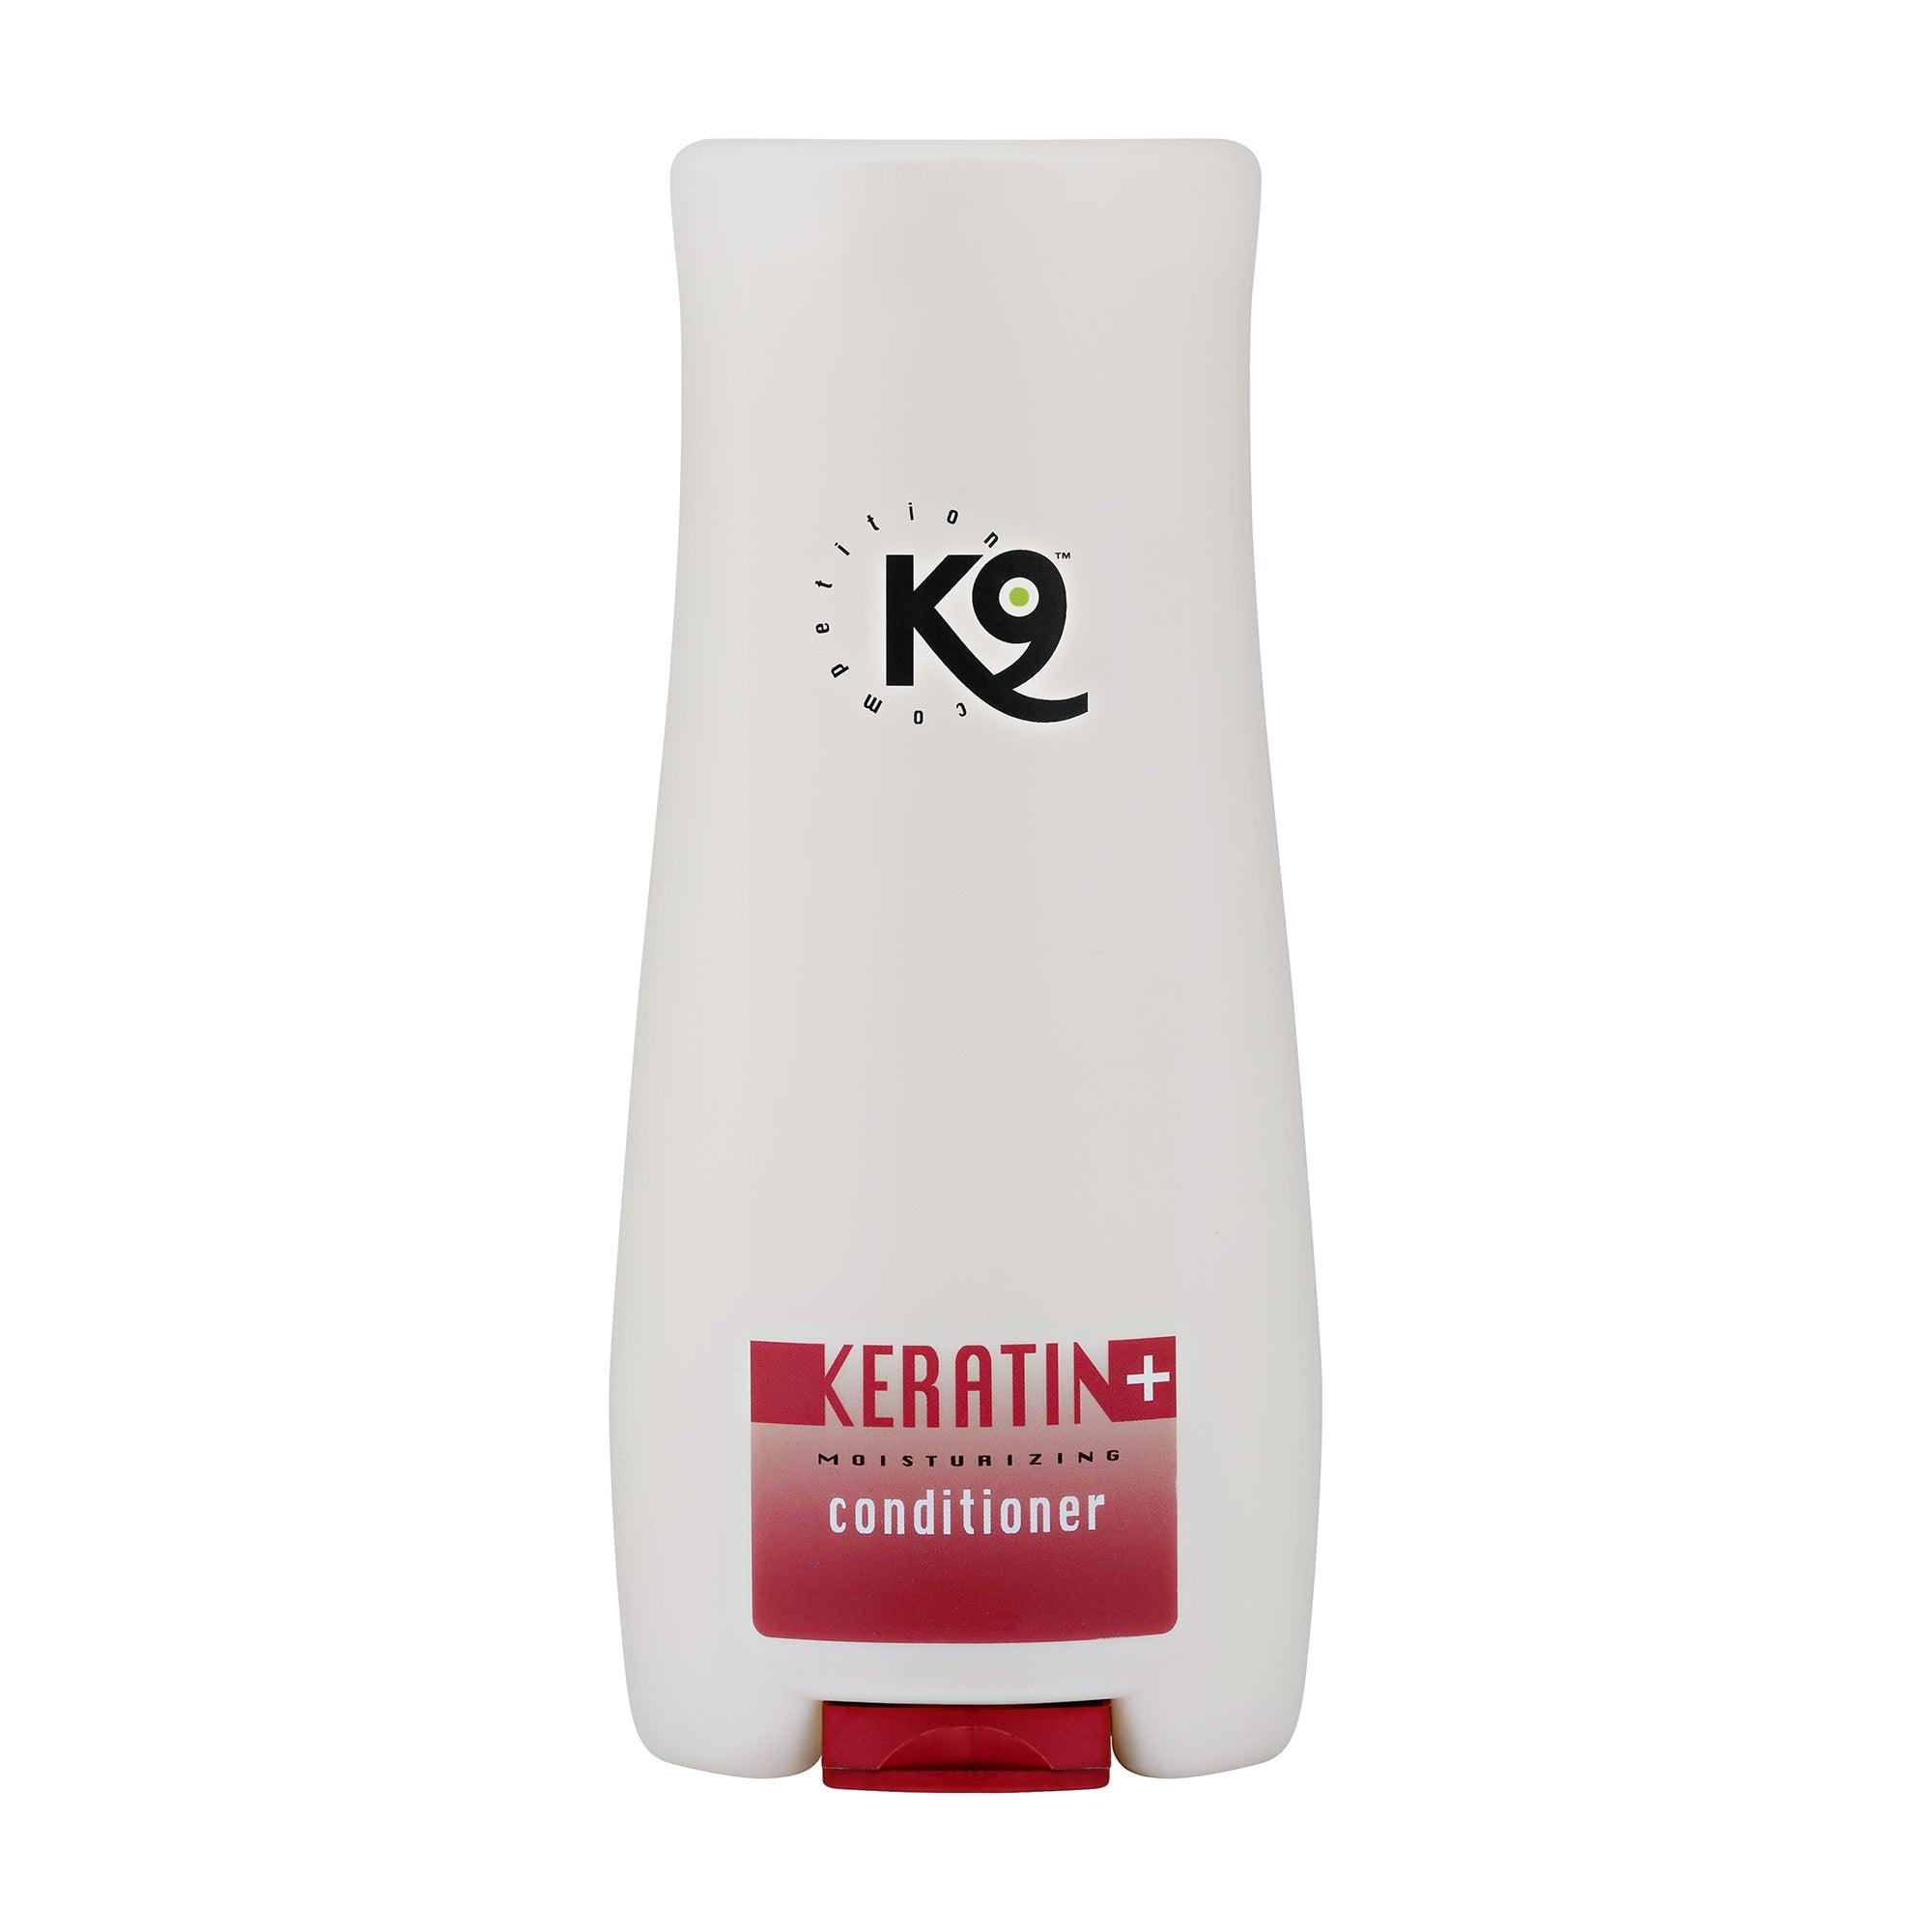 K9 Keratin+ Conditioner - K9 Competition